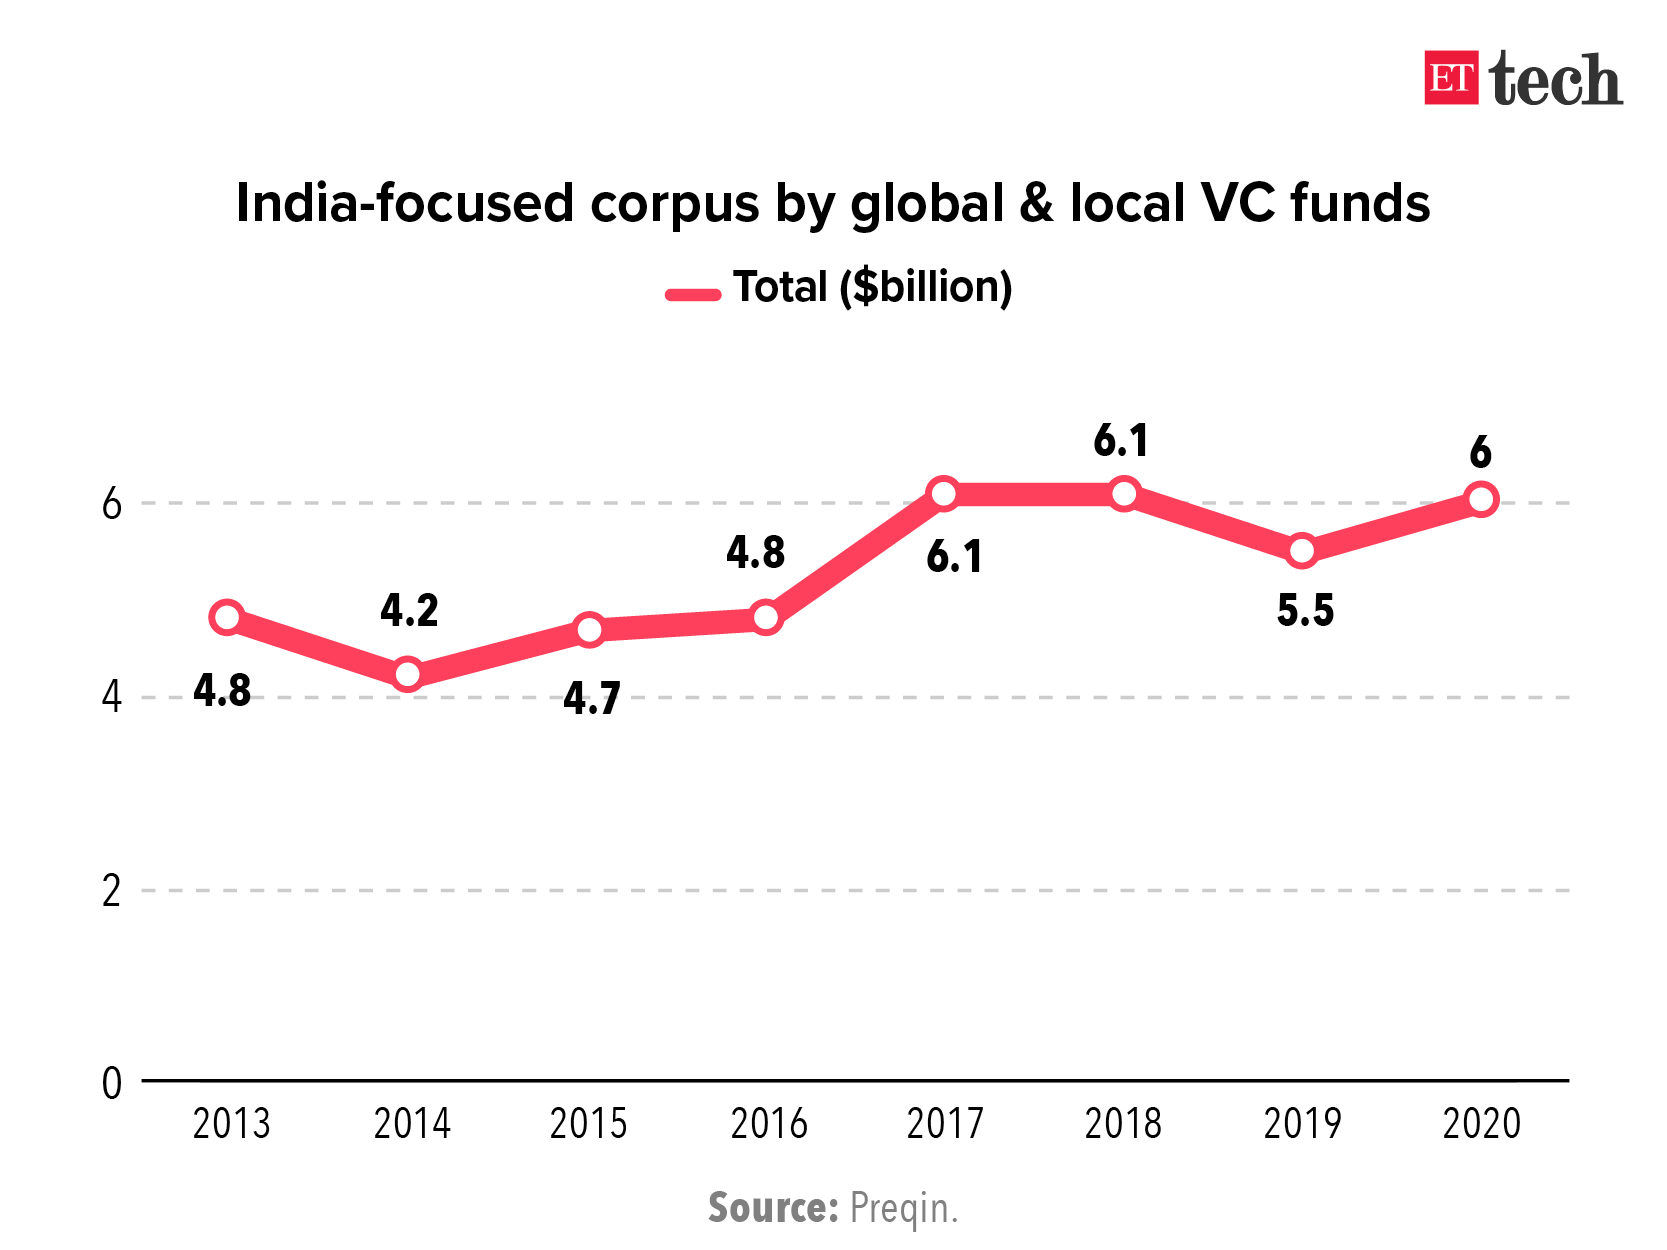 case study on venture capital in india